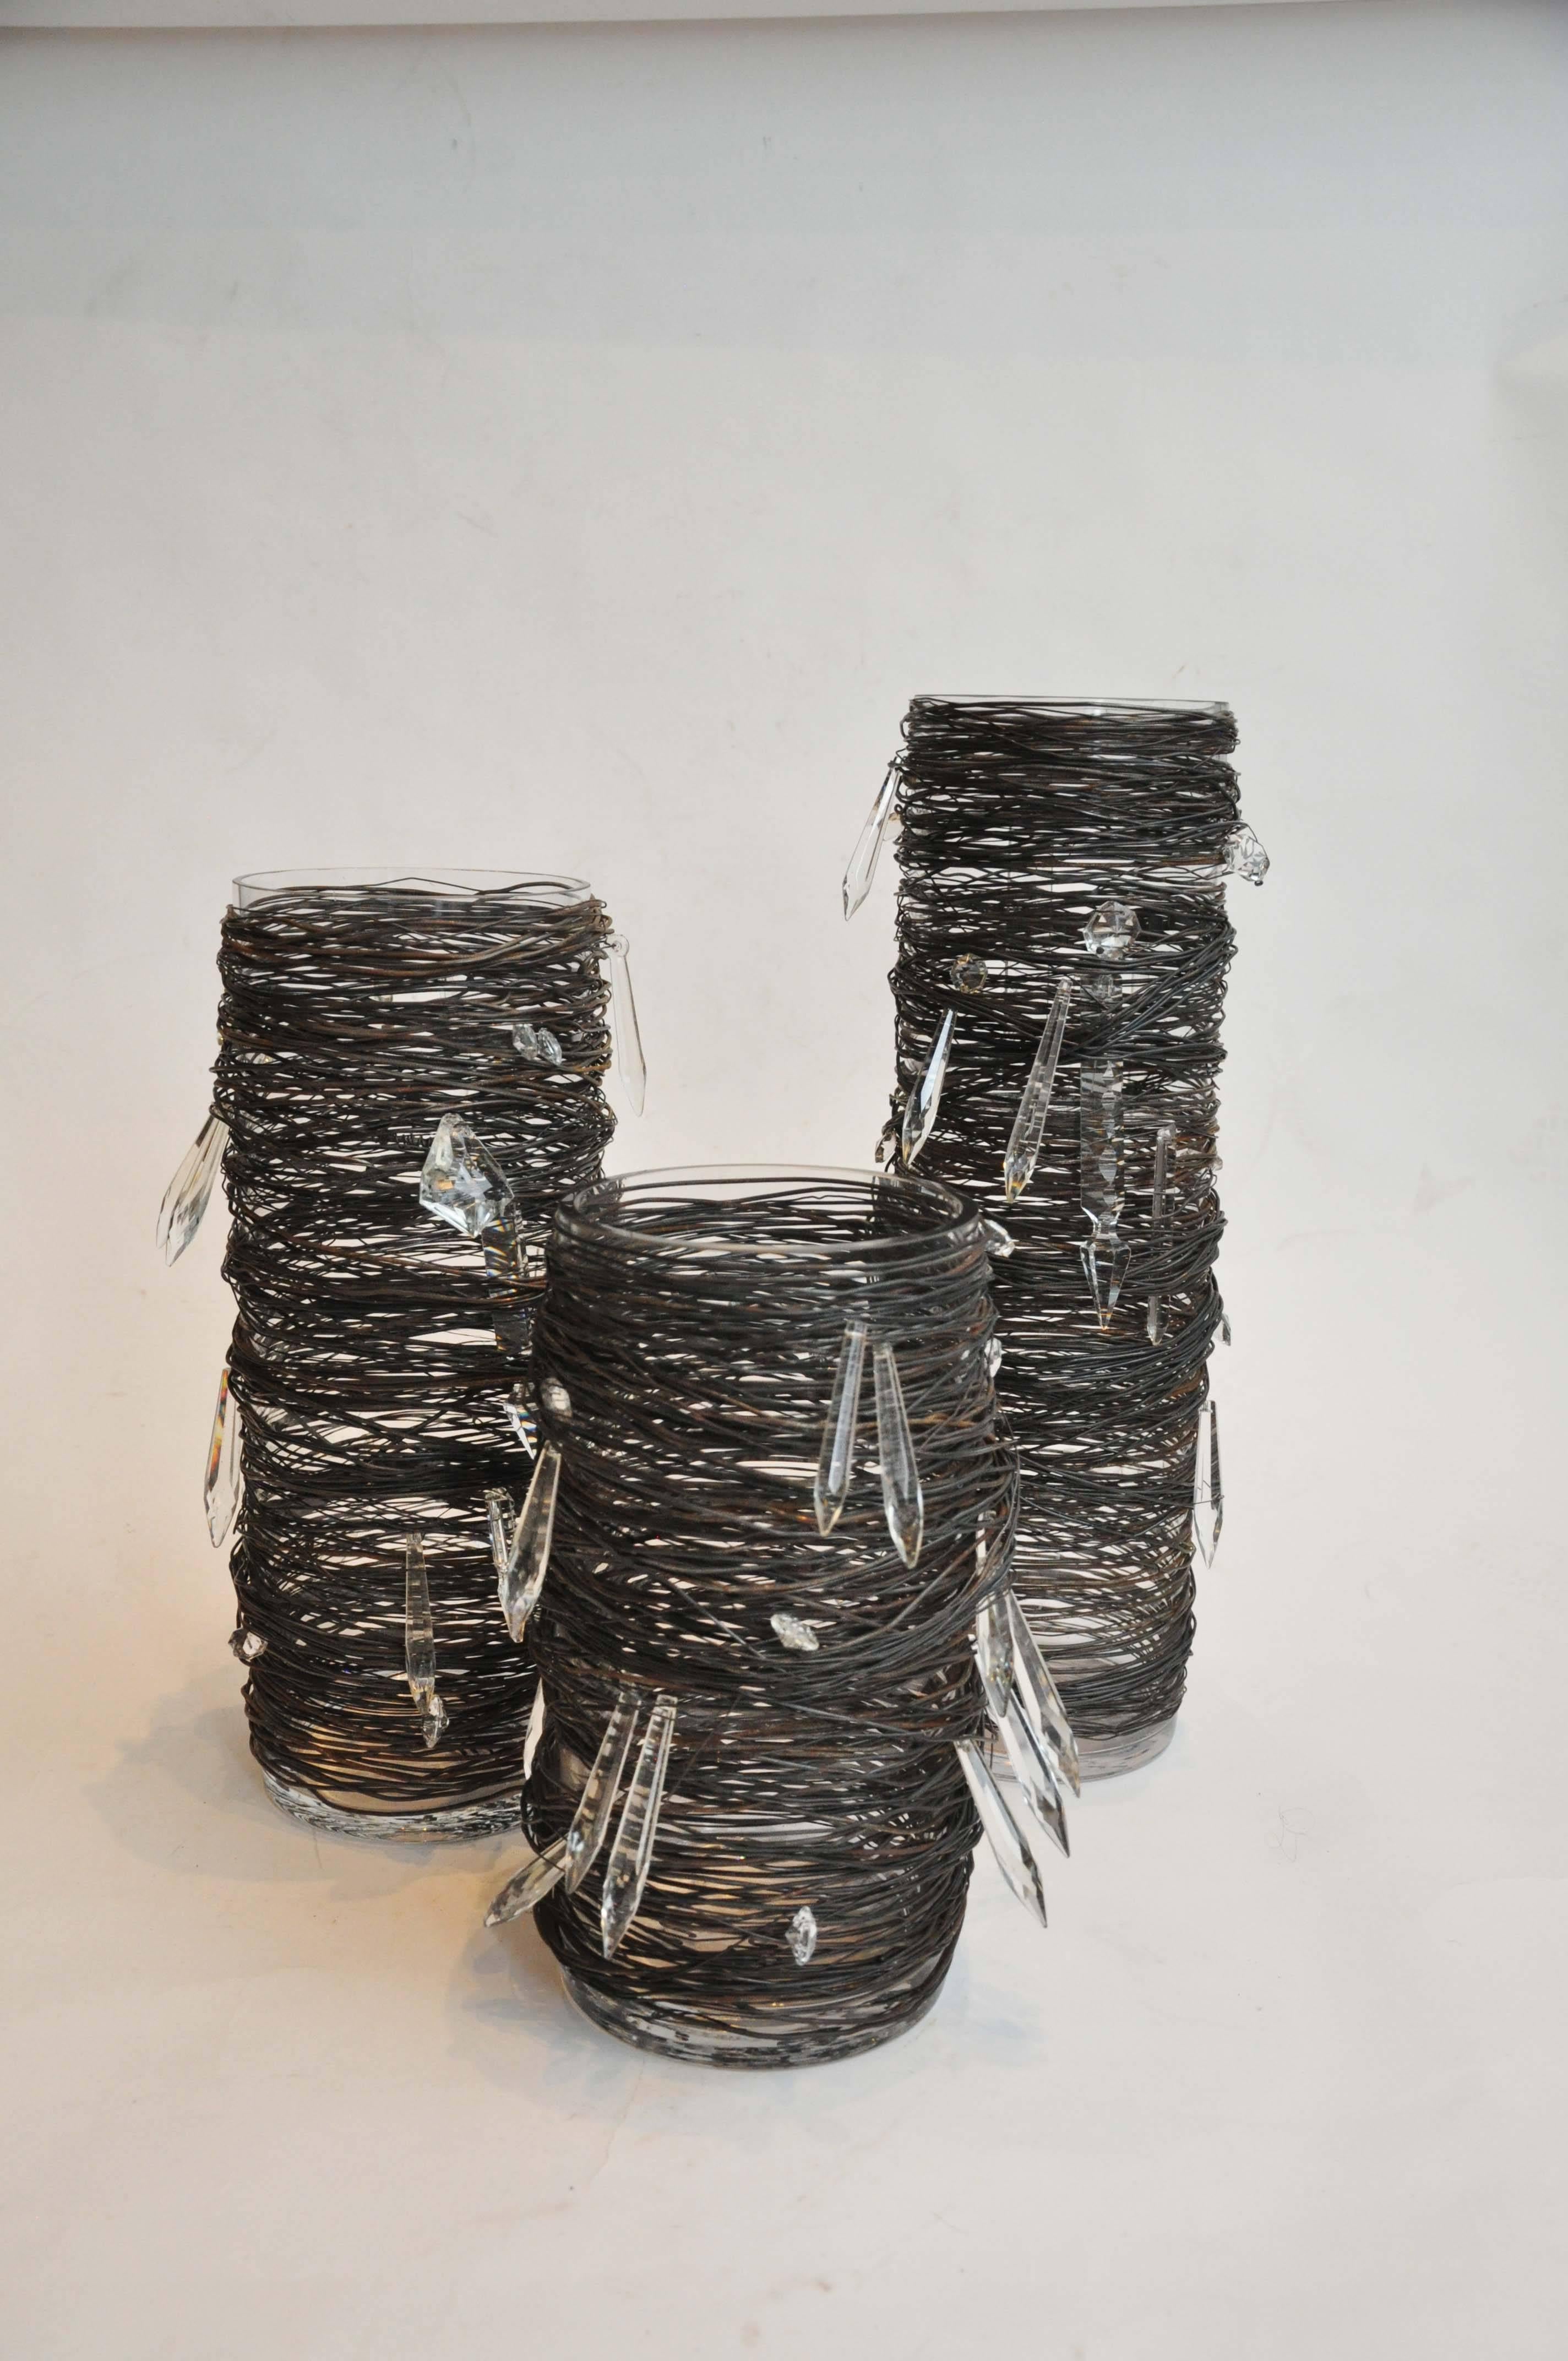 21st century wire and crystal vessels by sculptor Lucy Slivinski. 
Each glass vessel is wrapped in layers of metal and a cut glass crystals interwoven into the metal layers. 
Fabulous as a vase or as stand alone sculptures. 
Priced per piece
Three